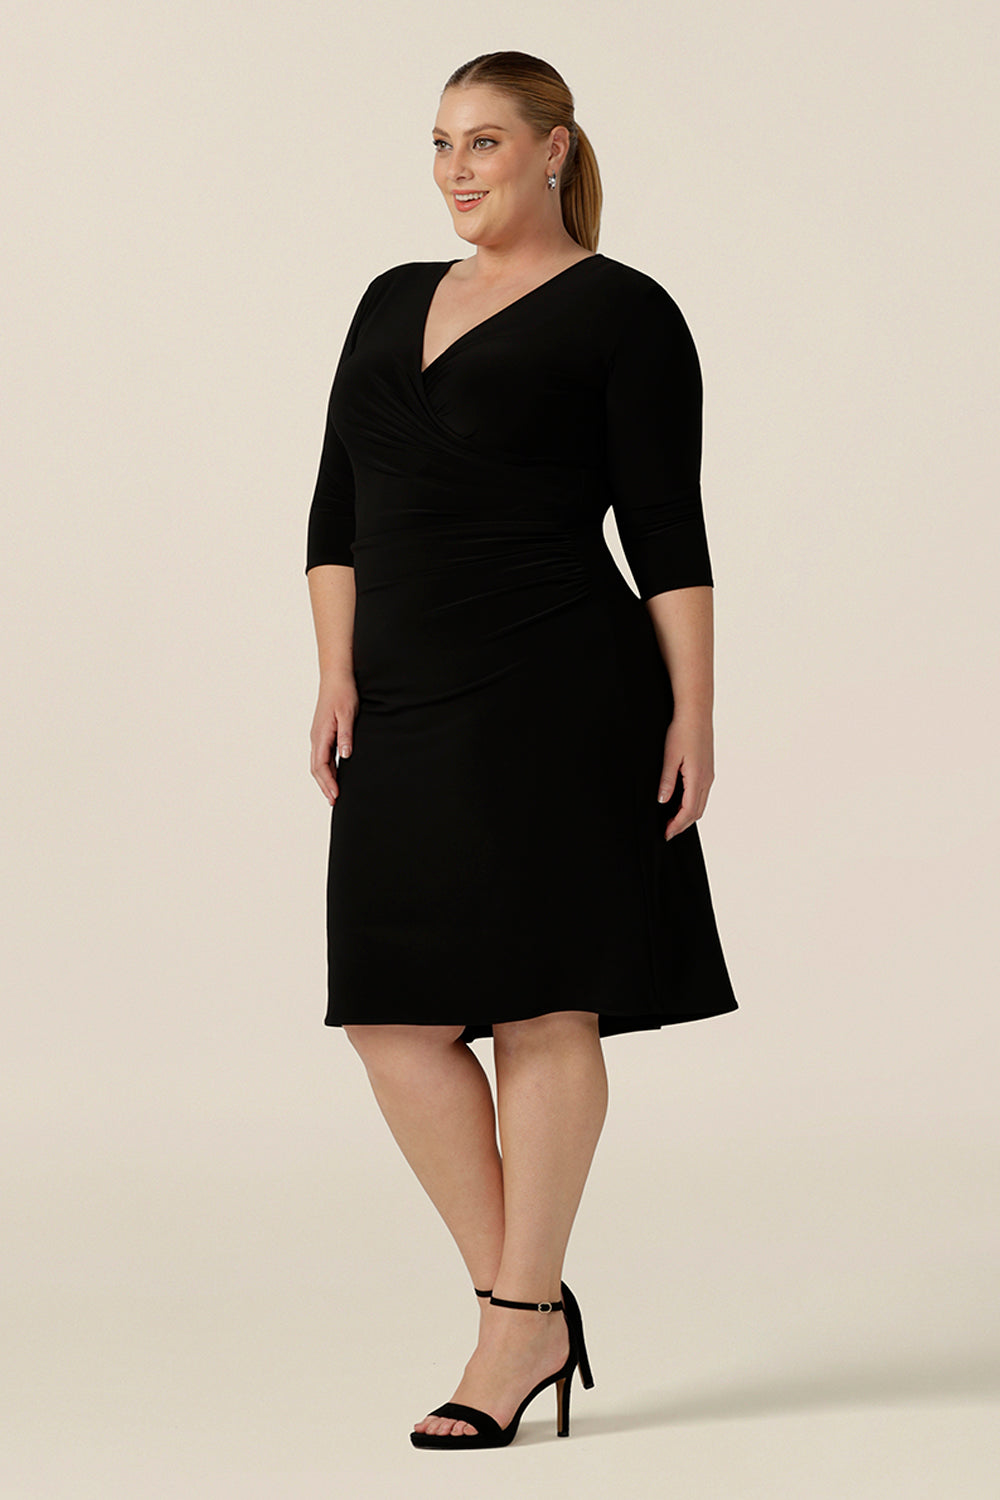 An elegant little black dress for evening and occasion wear, this is a fixed wrap, black jersey dress with 3/4 sleeves. Worn by a fuller figure, size 18 woman, shop this made-in-Australia dress in sizes 8 to 24.